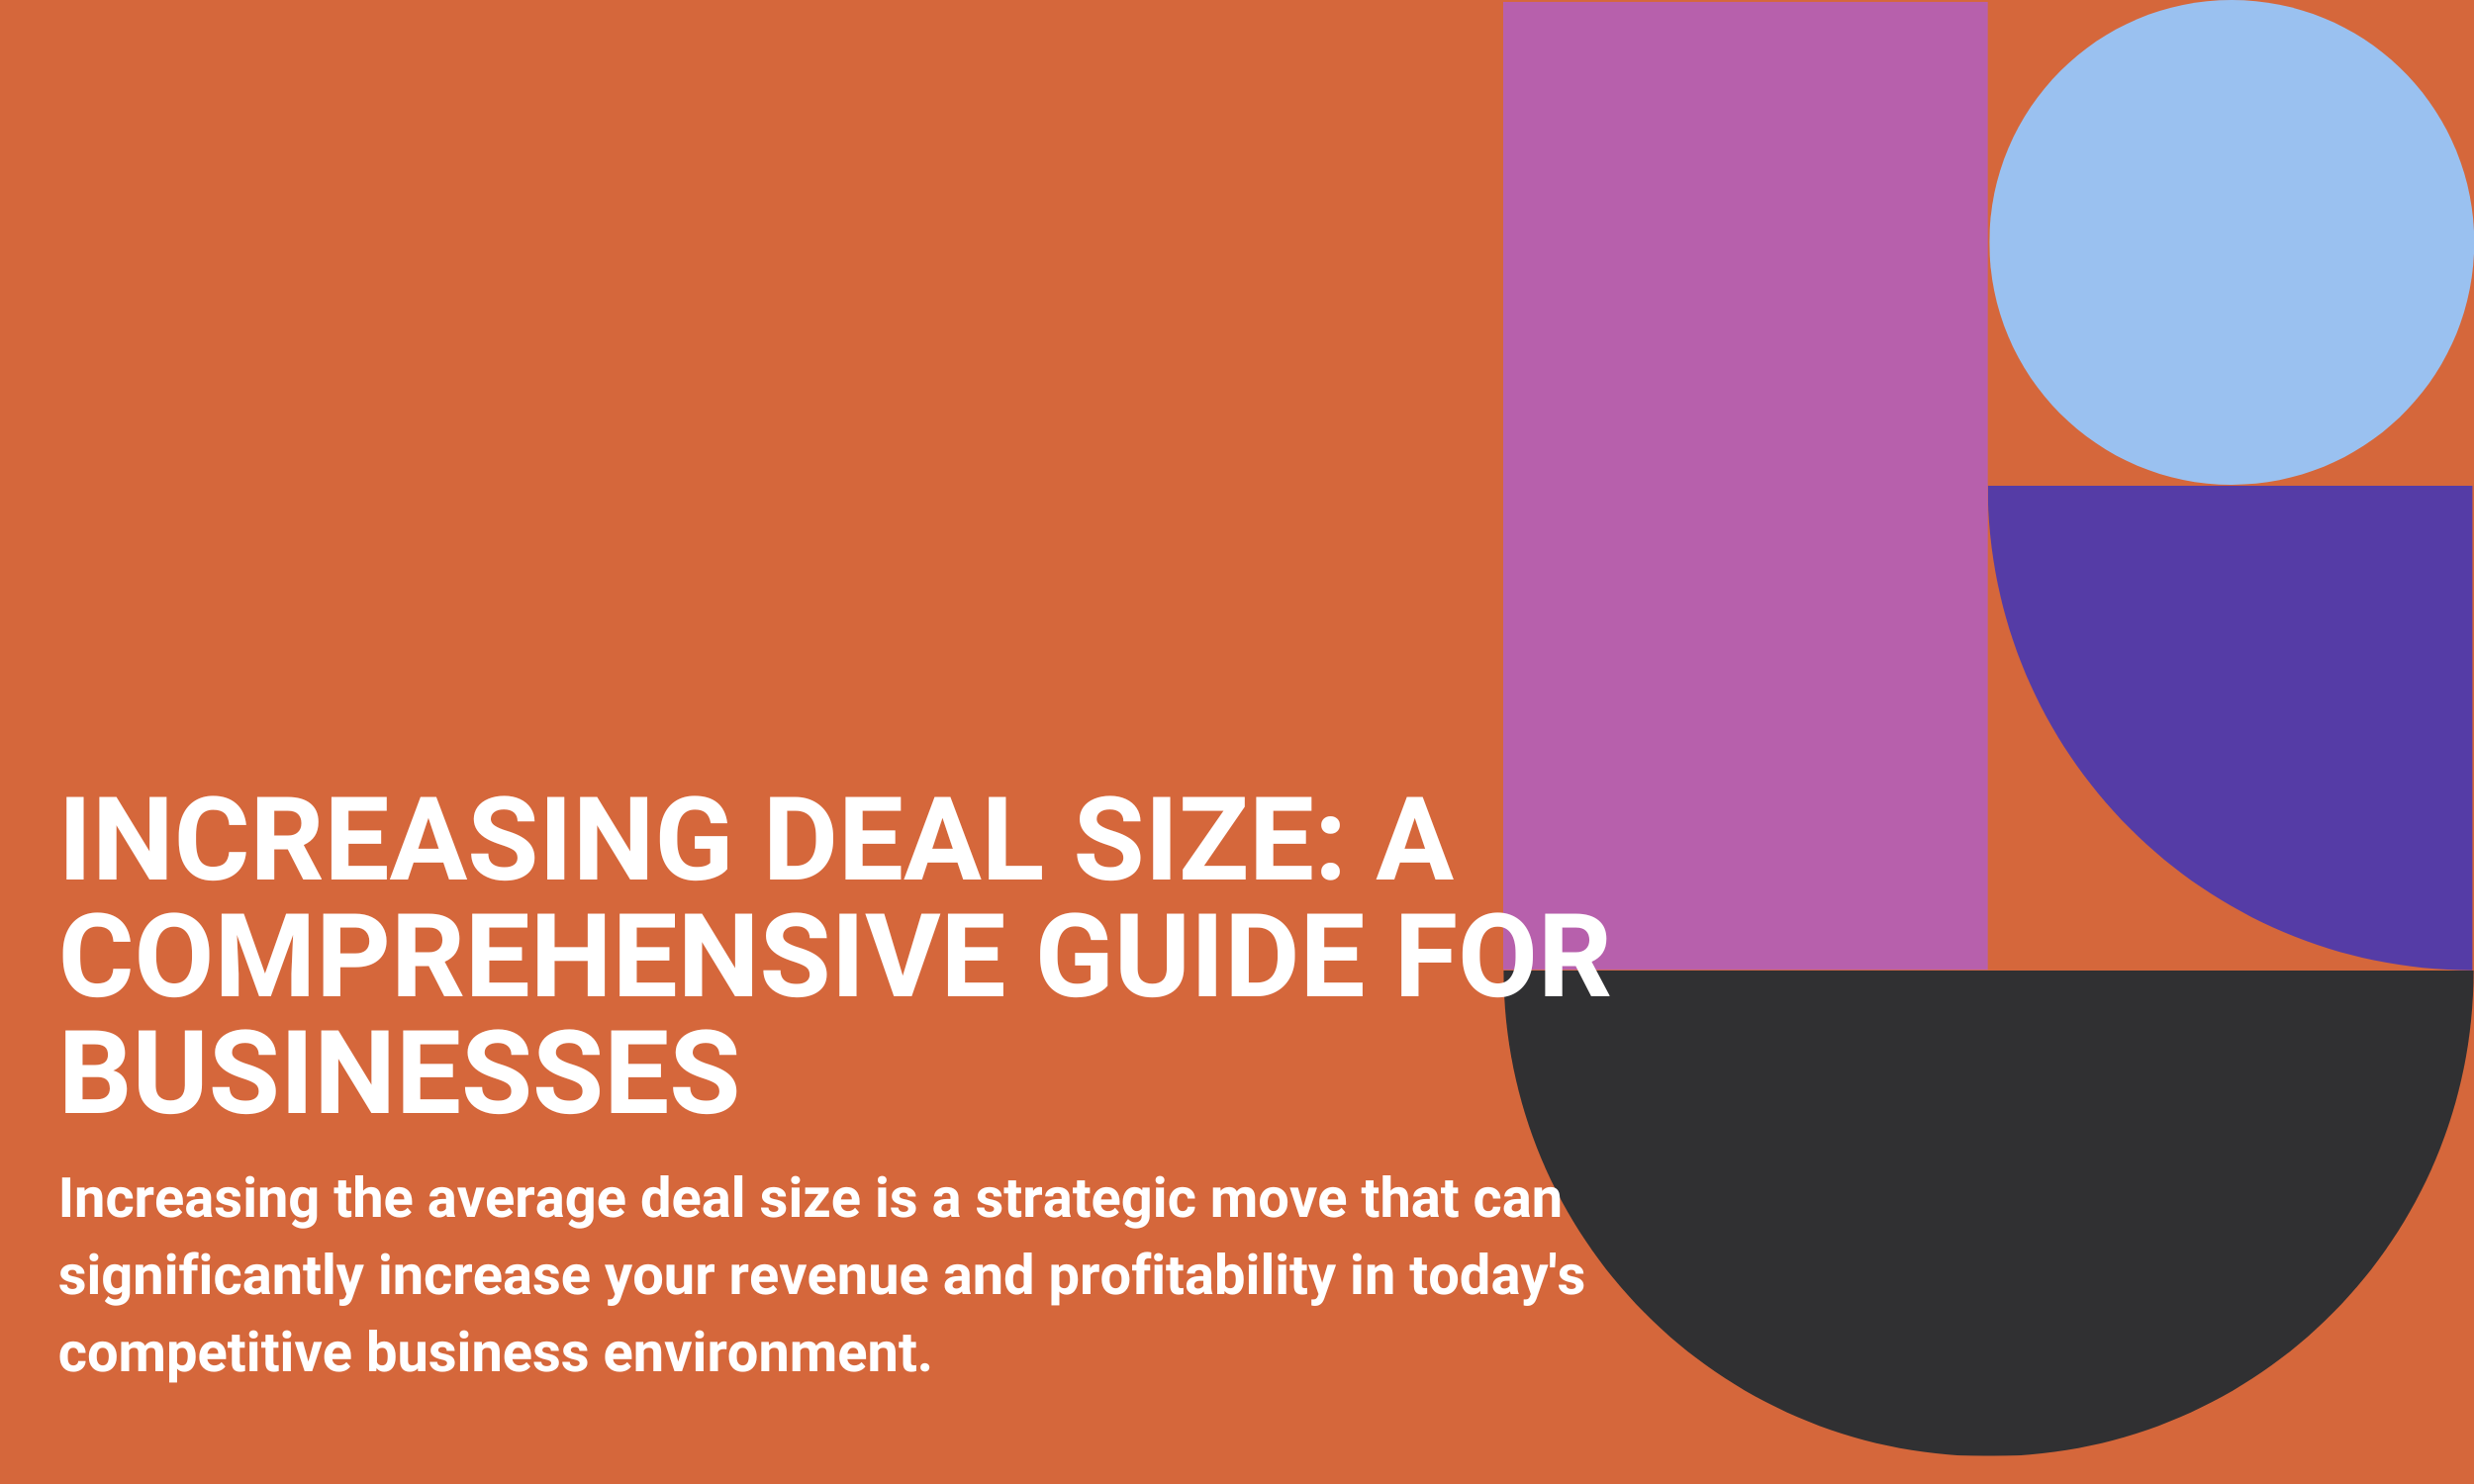 Increasing Deal Size: A Comprehensive Guide for Businesses